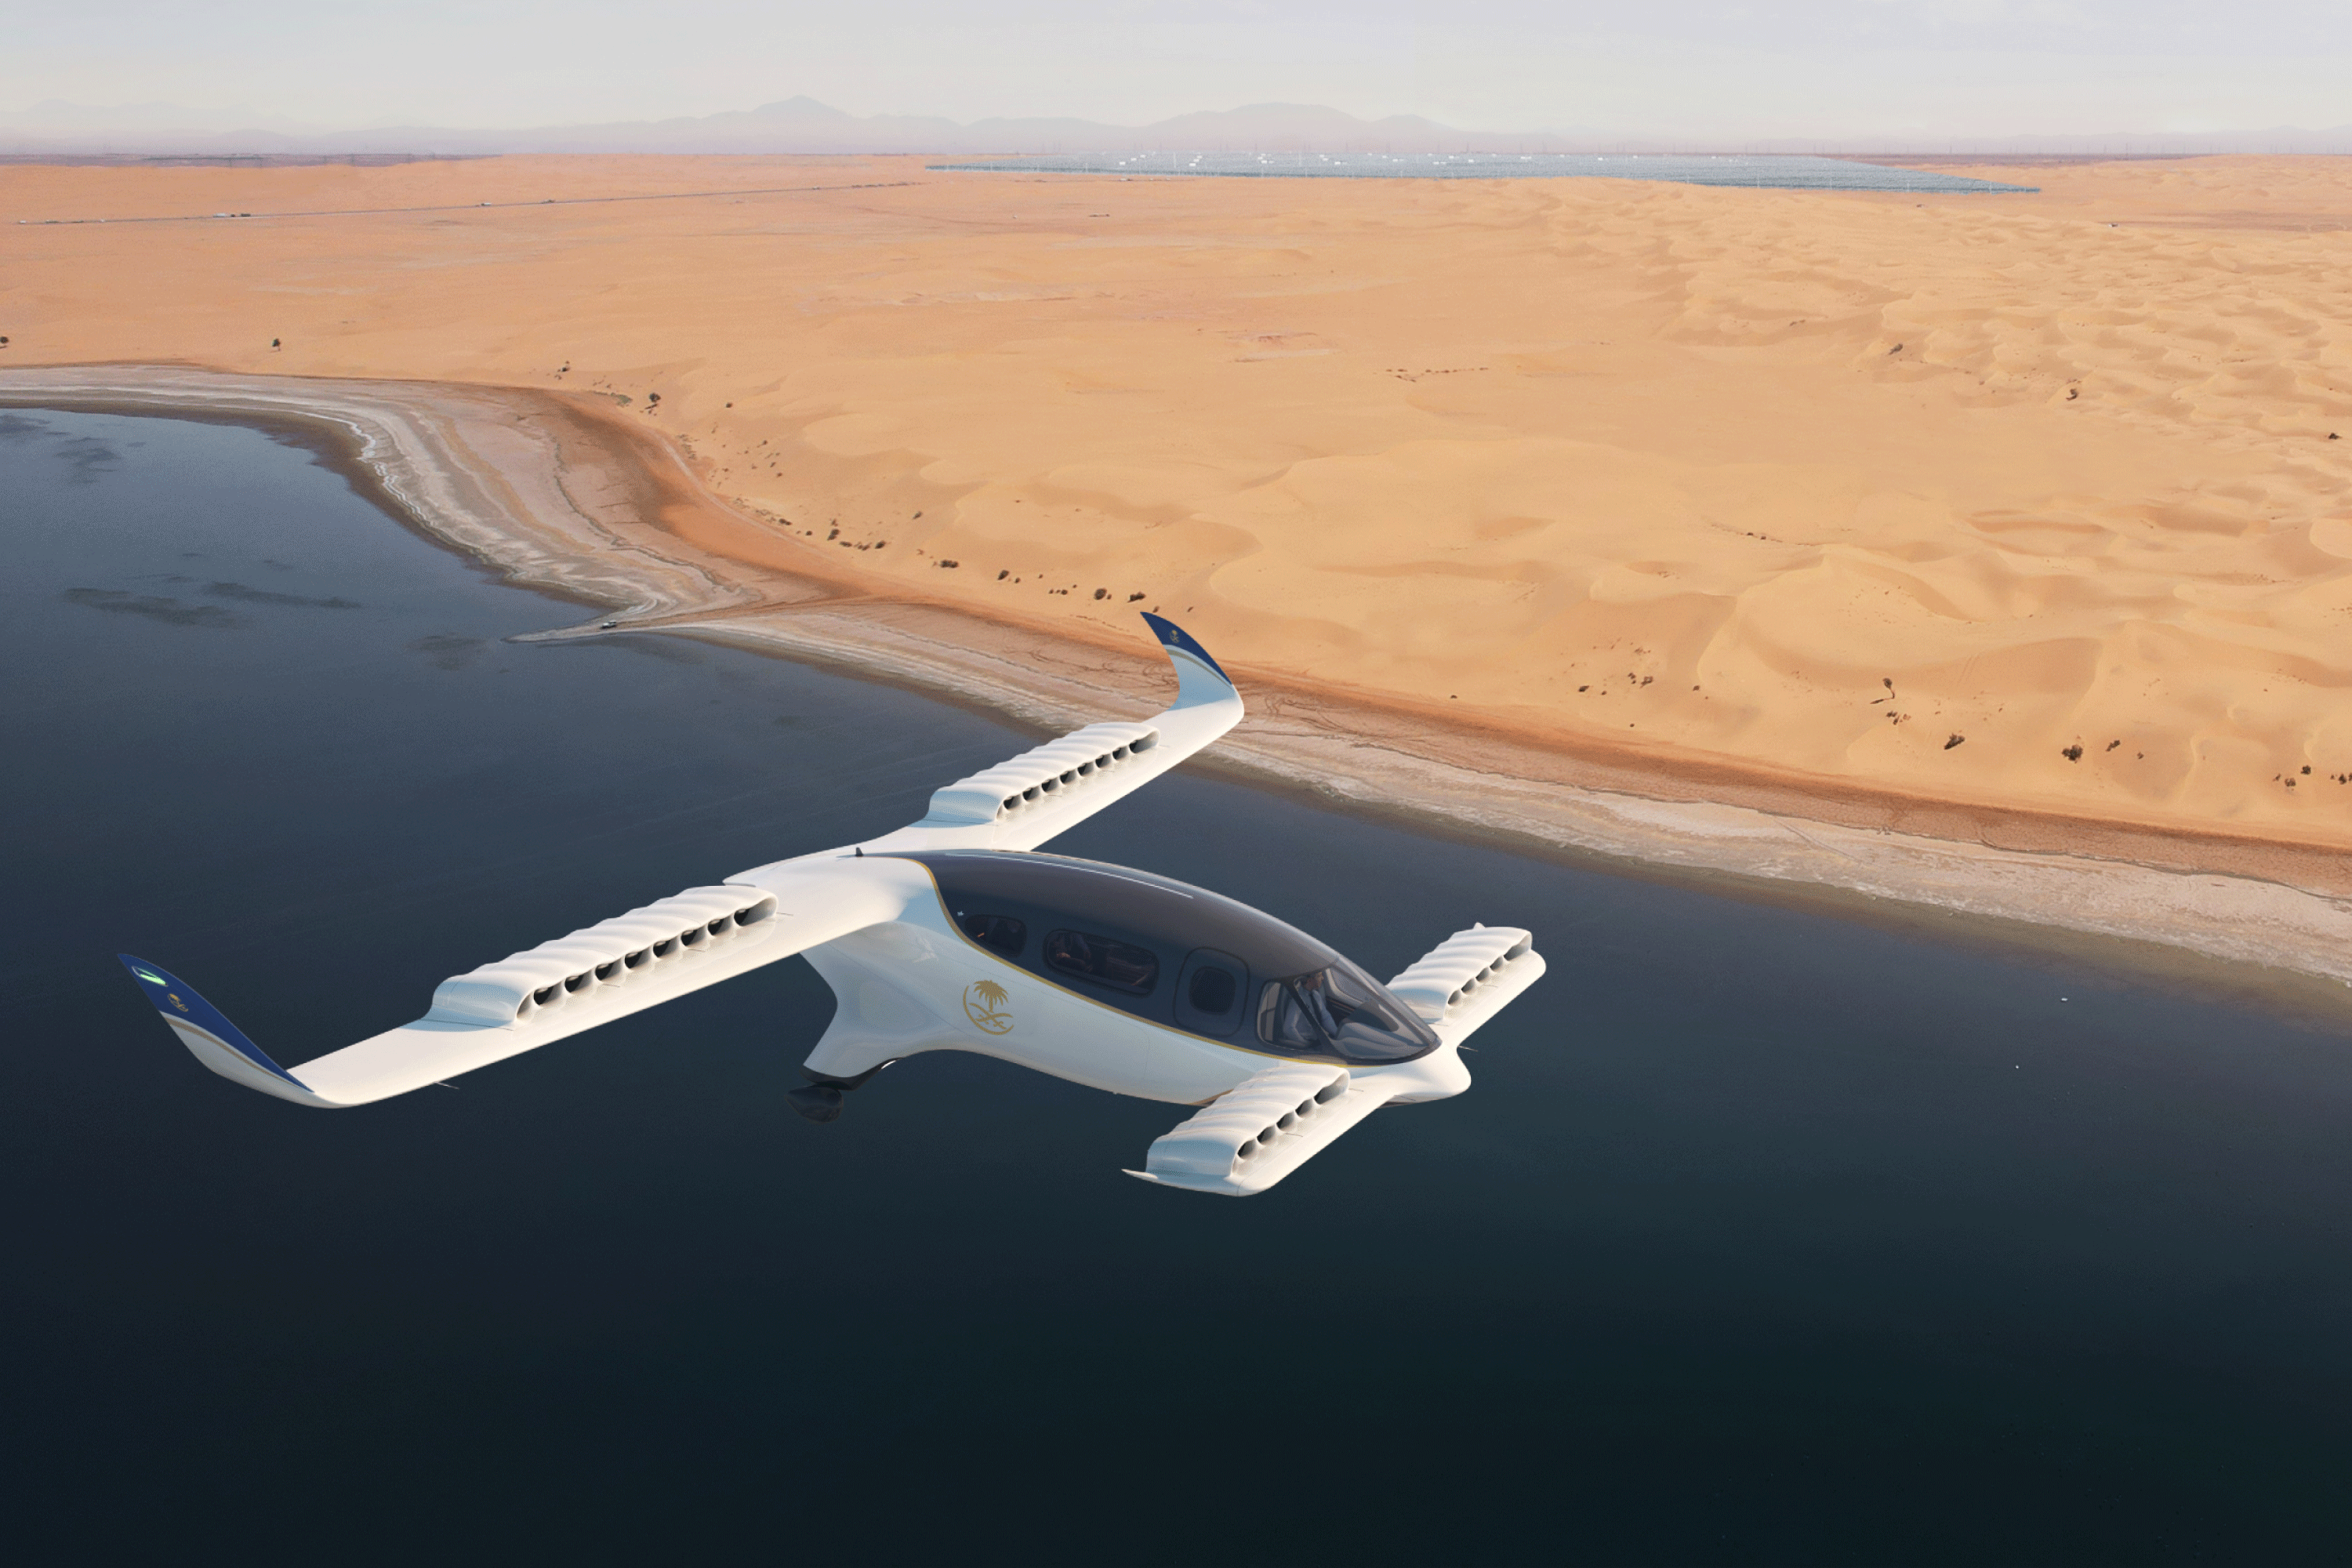 Press Release ! SAUDIA  will  buy  100 Lilium  eVTOL  aircraft  for  the  development  and  operation  of an eVTOL network across  Saudi Arabia .